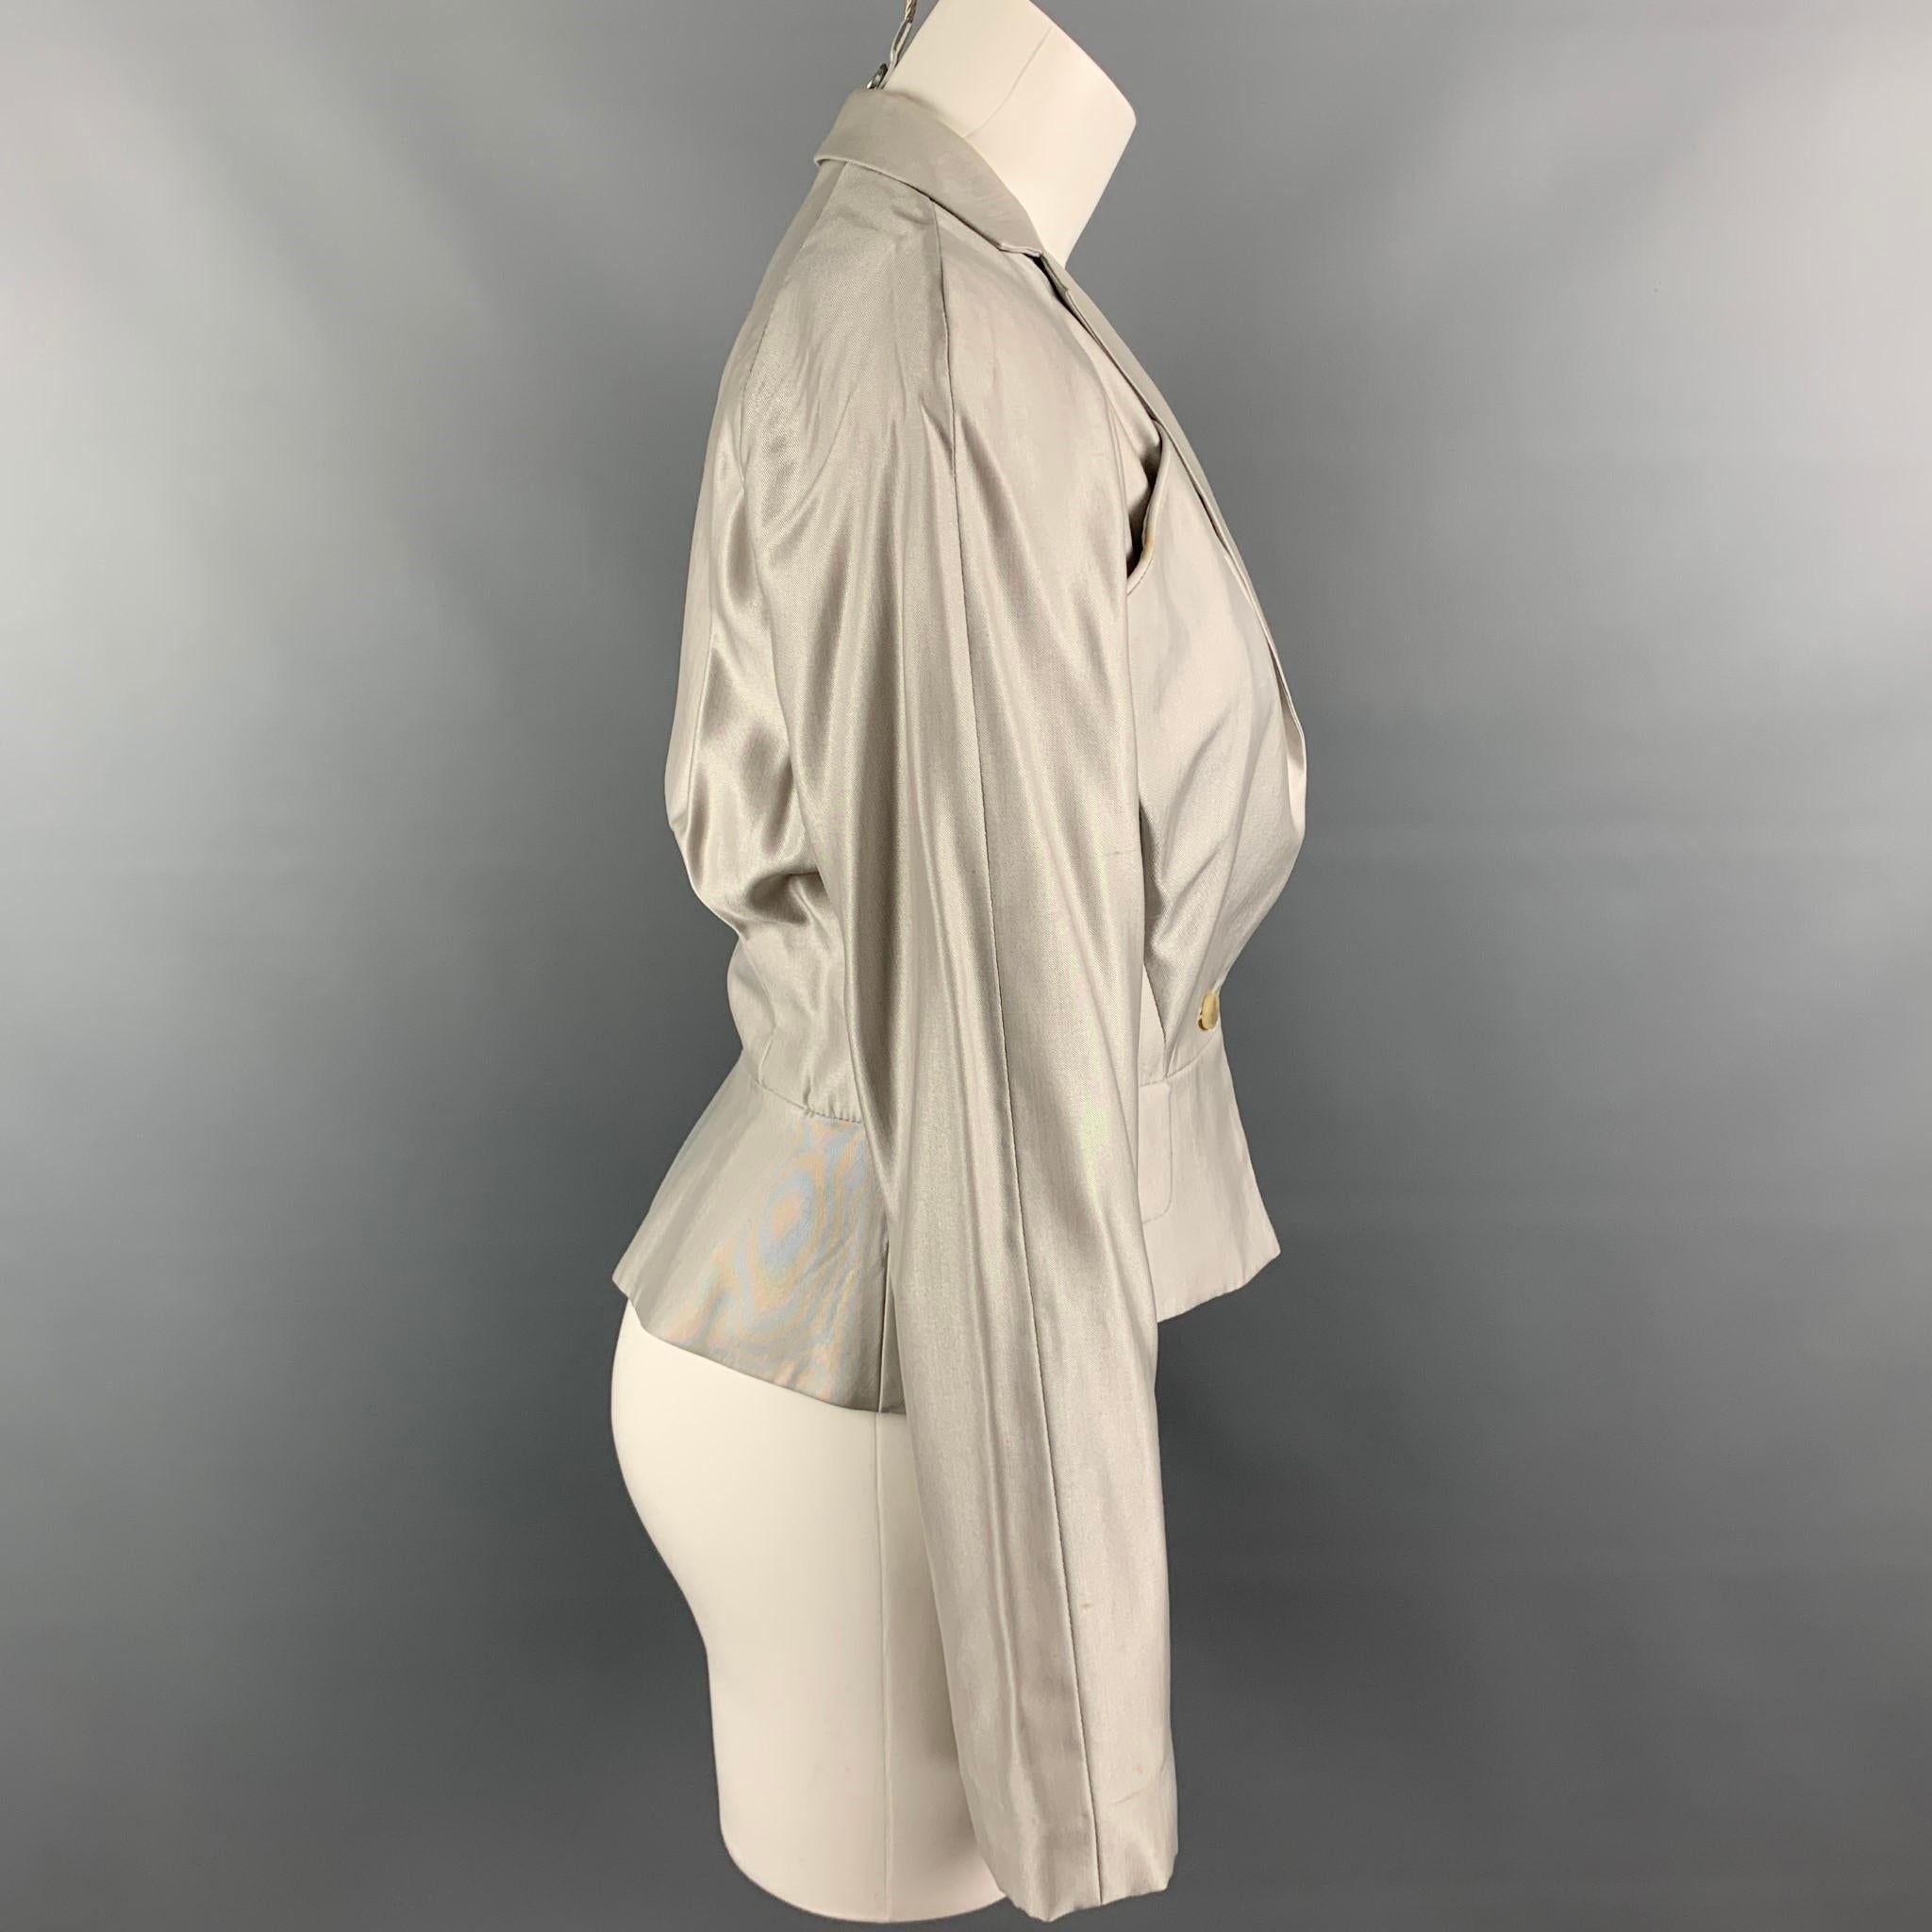 VIVIENNE WESTWOOD RED LABEL jacket comes in a light gray viscose blend with a full monogram print liner featuring a notch lapel, flap pockets, and a single button closure.

Good  Pre-Owned Condition. Minor discoloration at front. 
Marked: